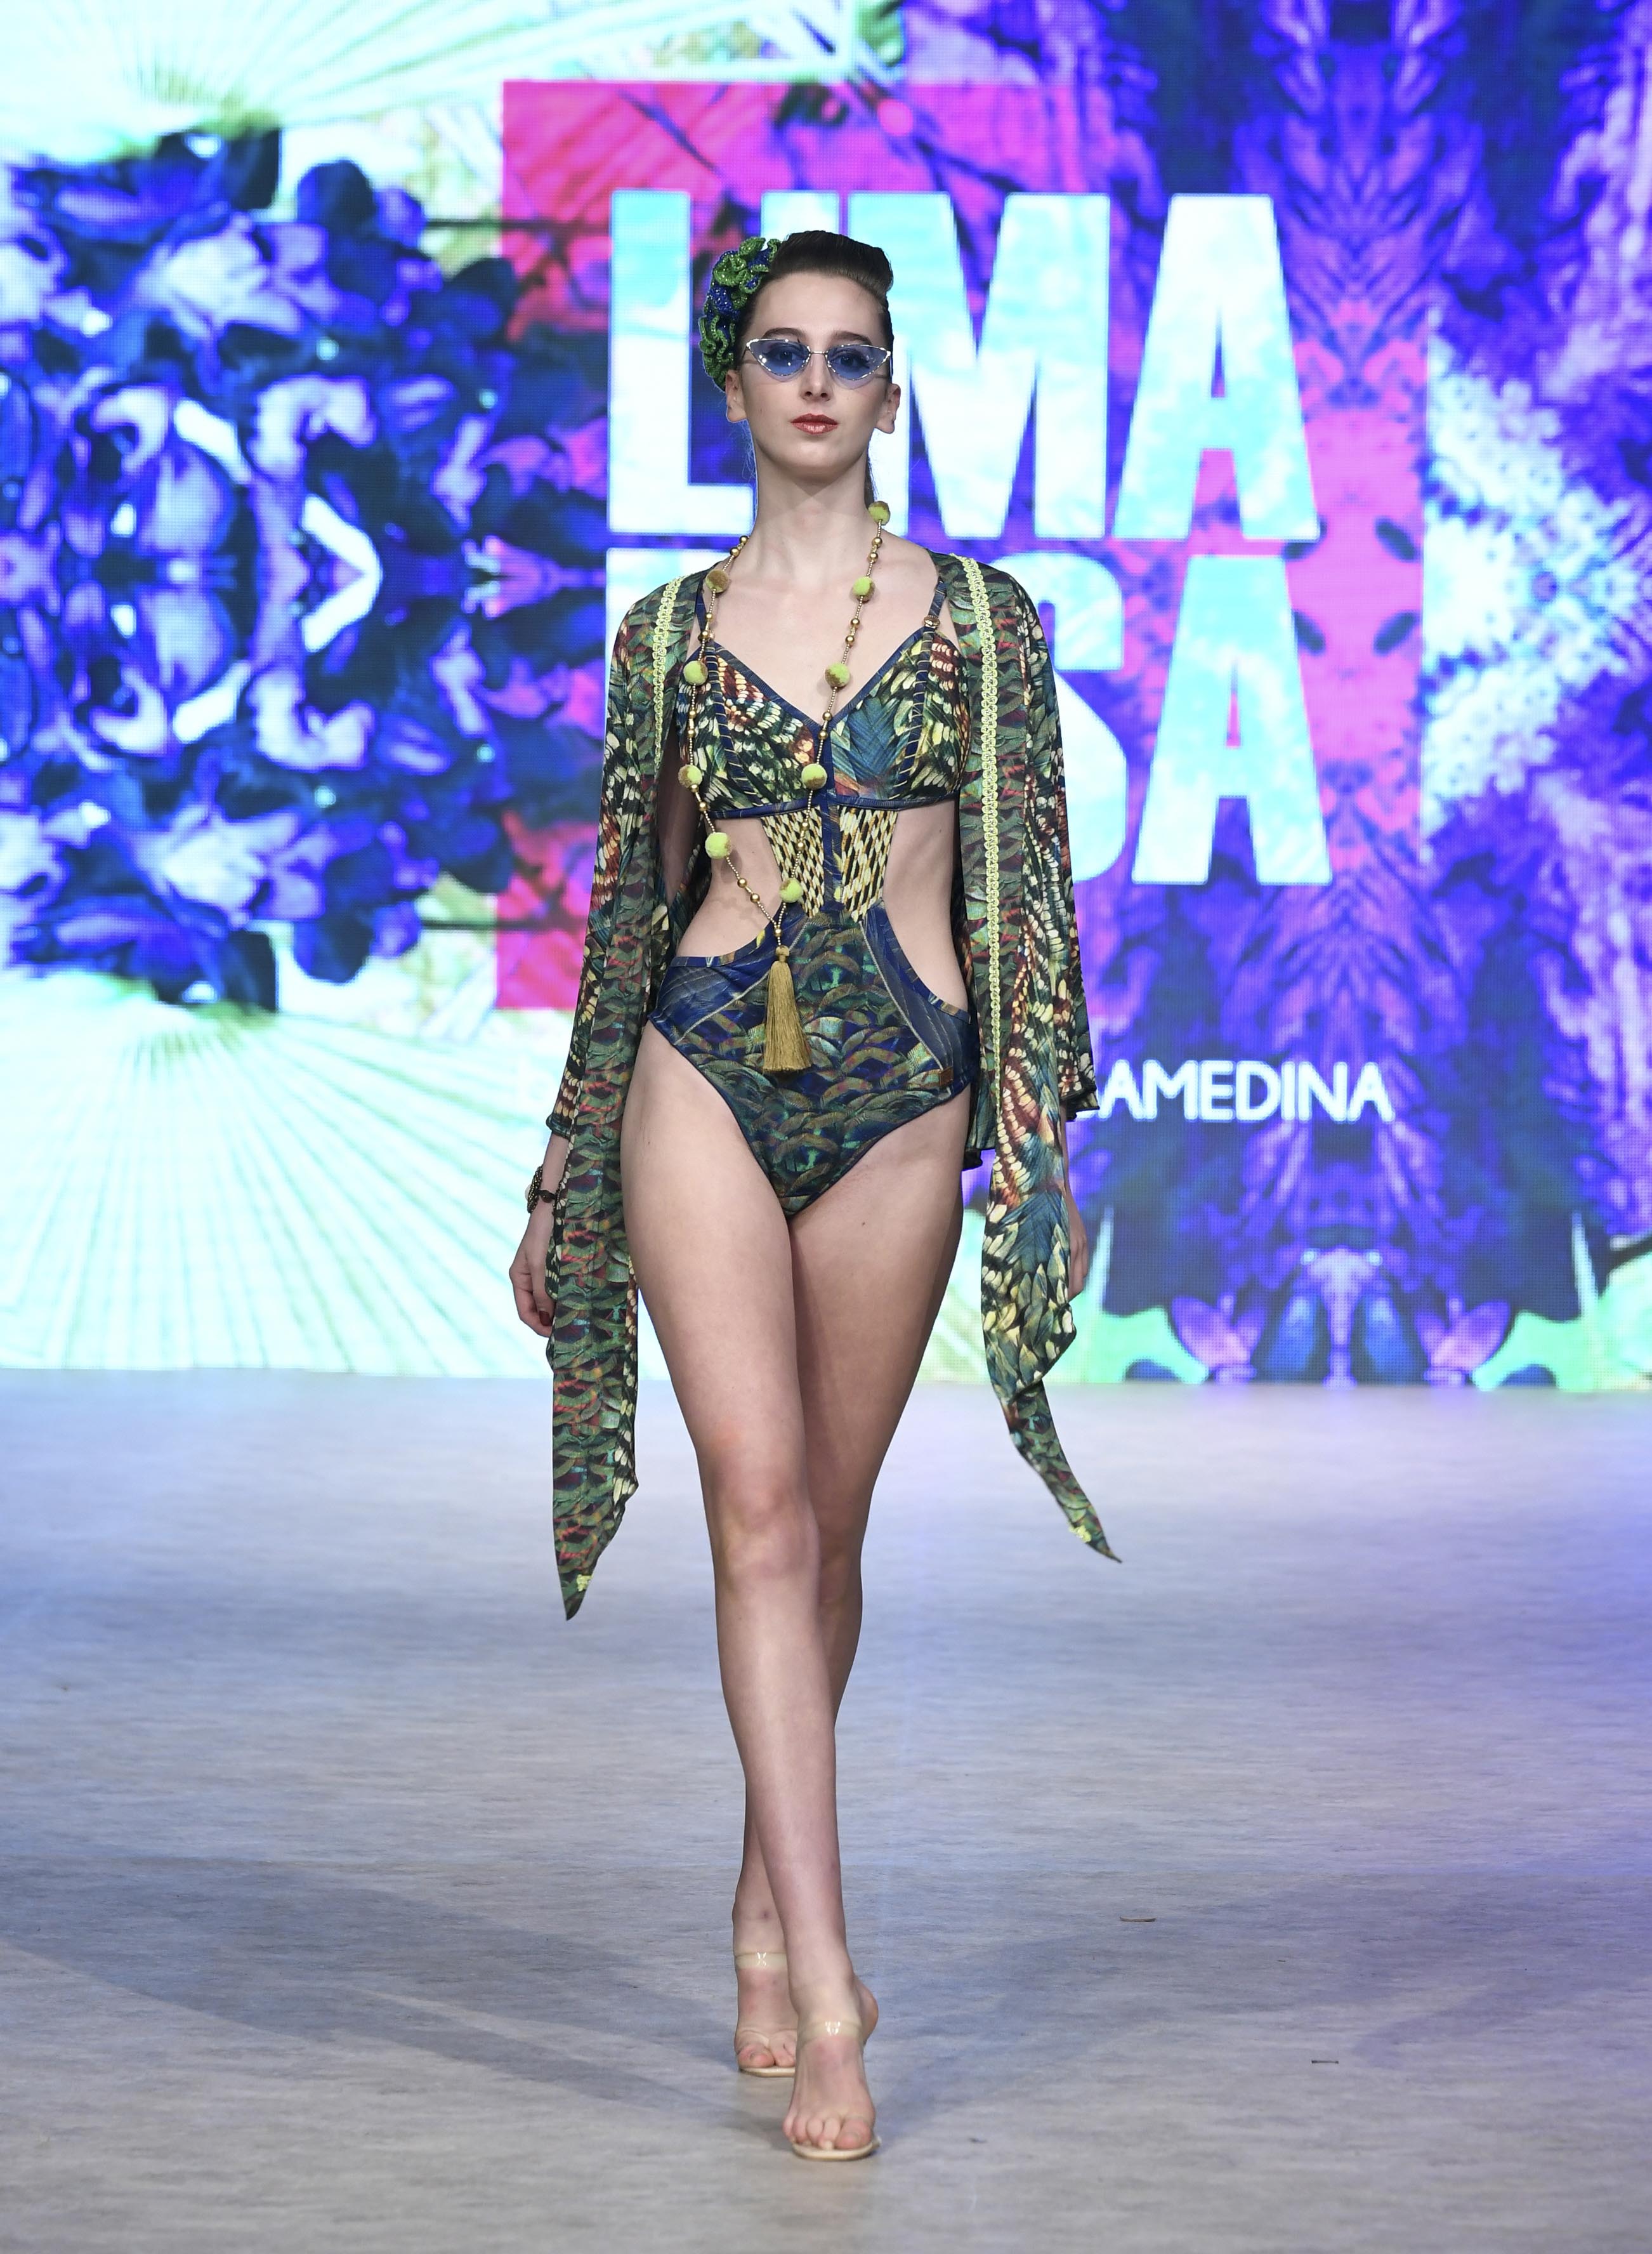 VANCOUVER, BC - SEPTEMBER 18:  A model walks the runway wearing Lima Rosa at Vancouver Fashion Week Spring/Summer 19 - Day 2 on September 18, 2018 in Vancouver, Canada.  (Photo by Arun Nevader/Getty Images for VFW Management INC)